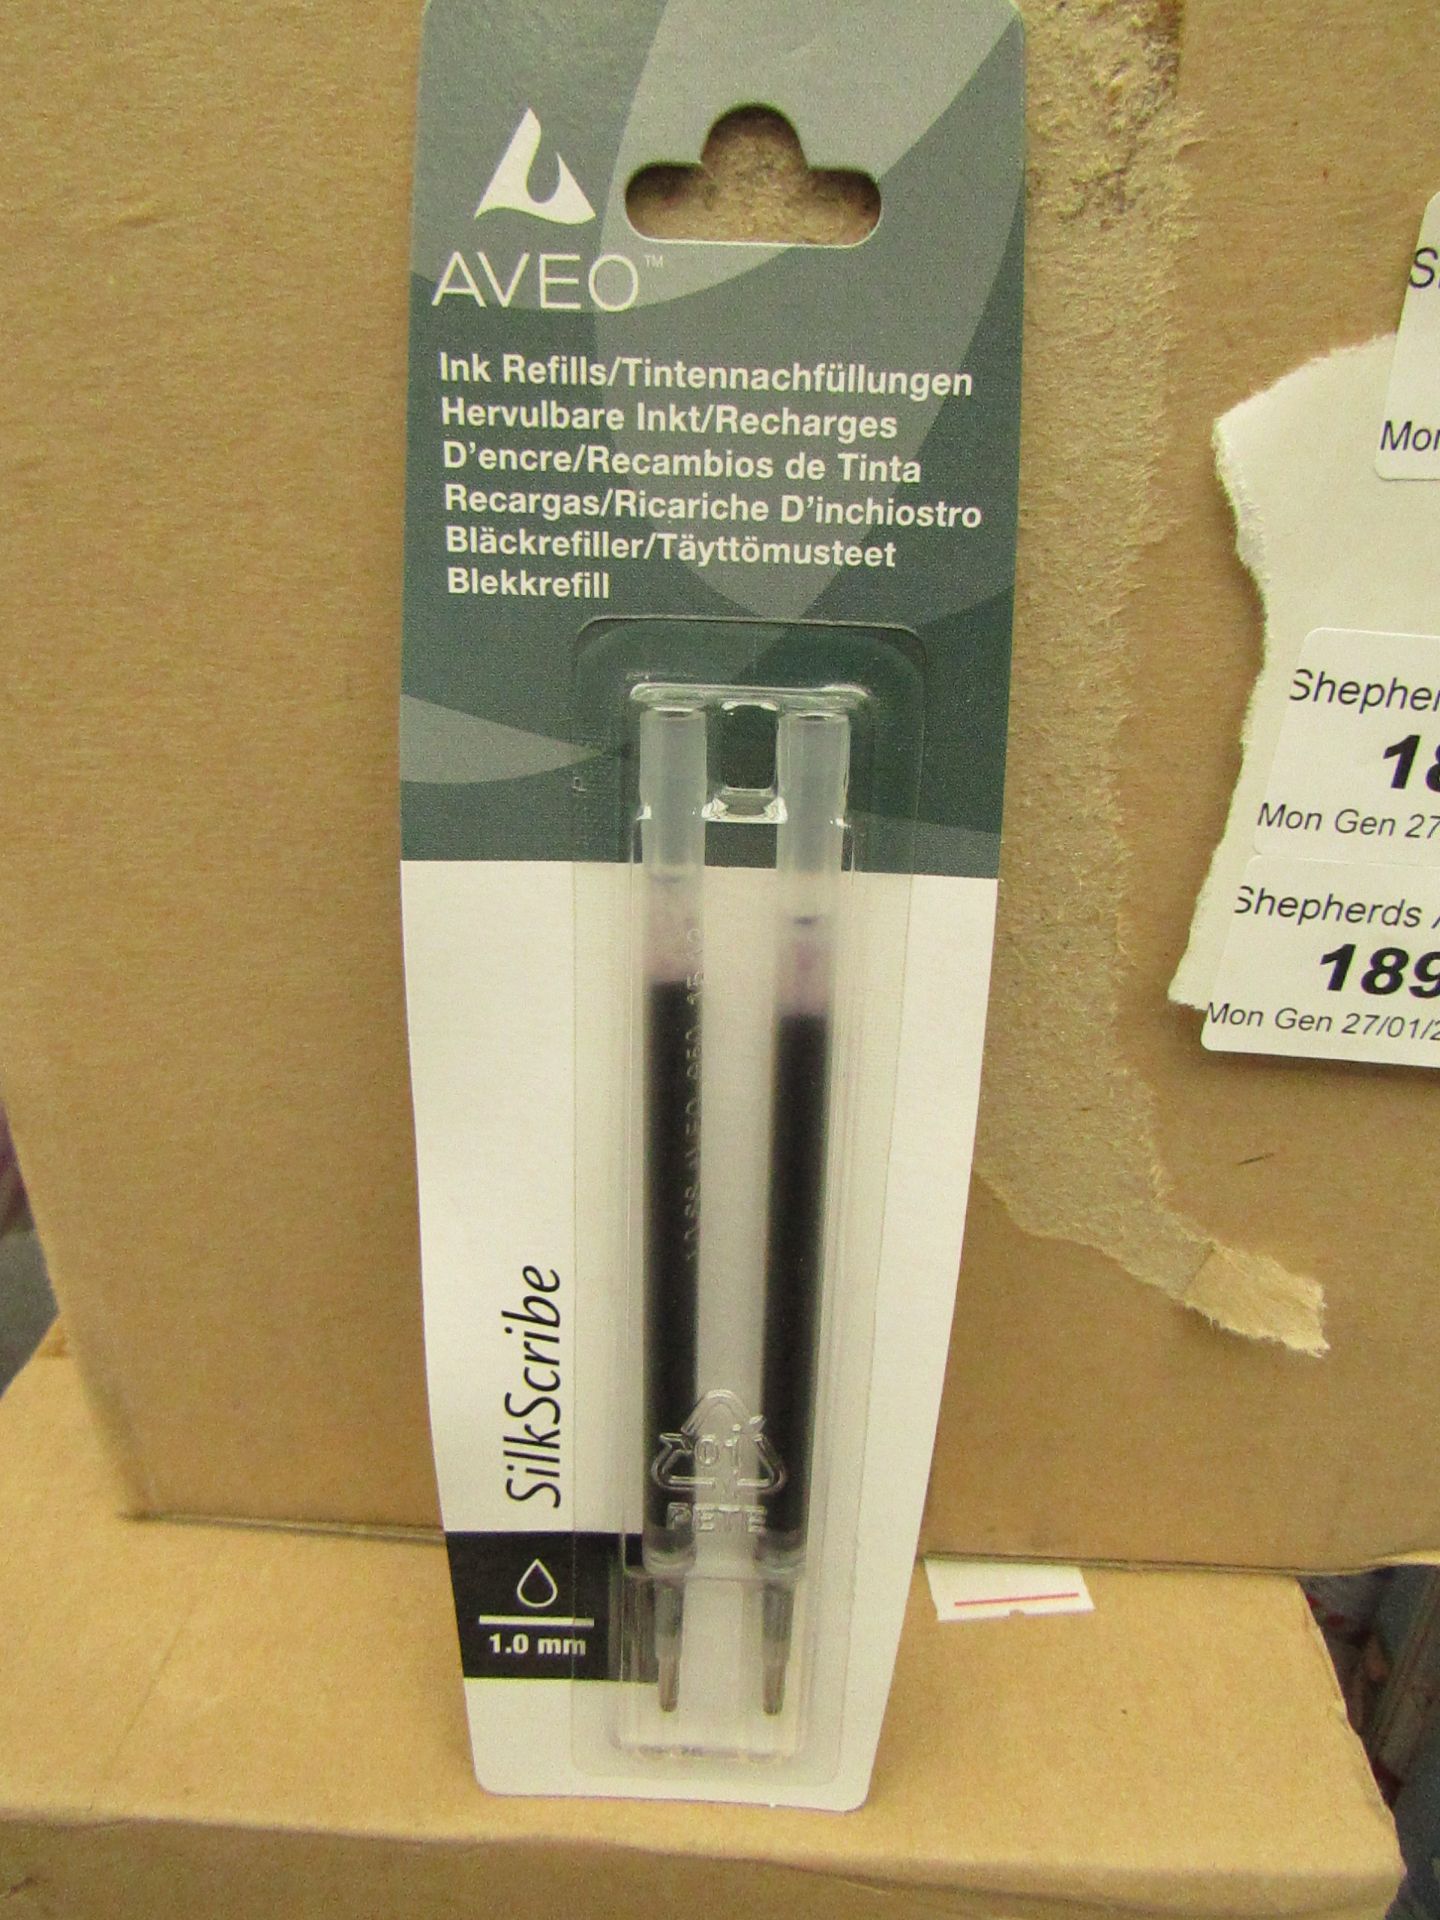 72 Packs of 2 Aveo 1mm Ink Refills. New & Boxed